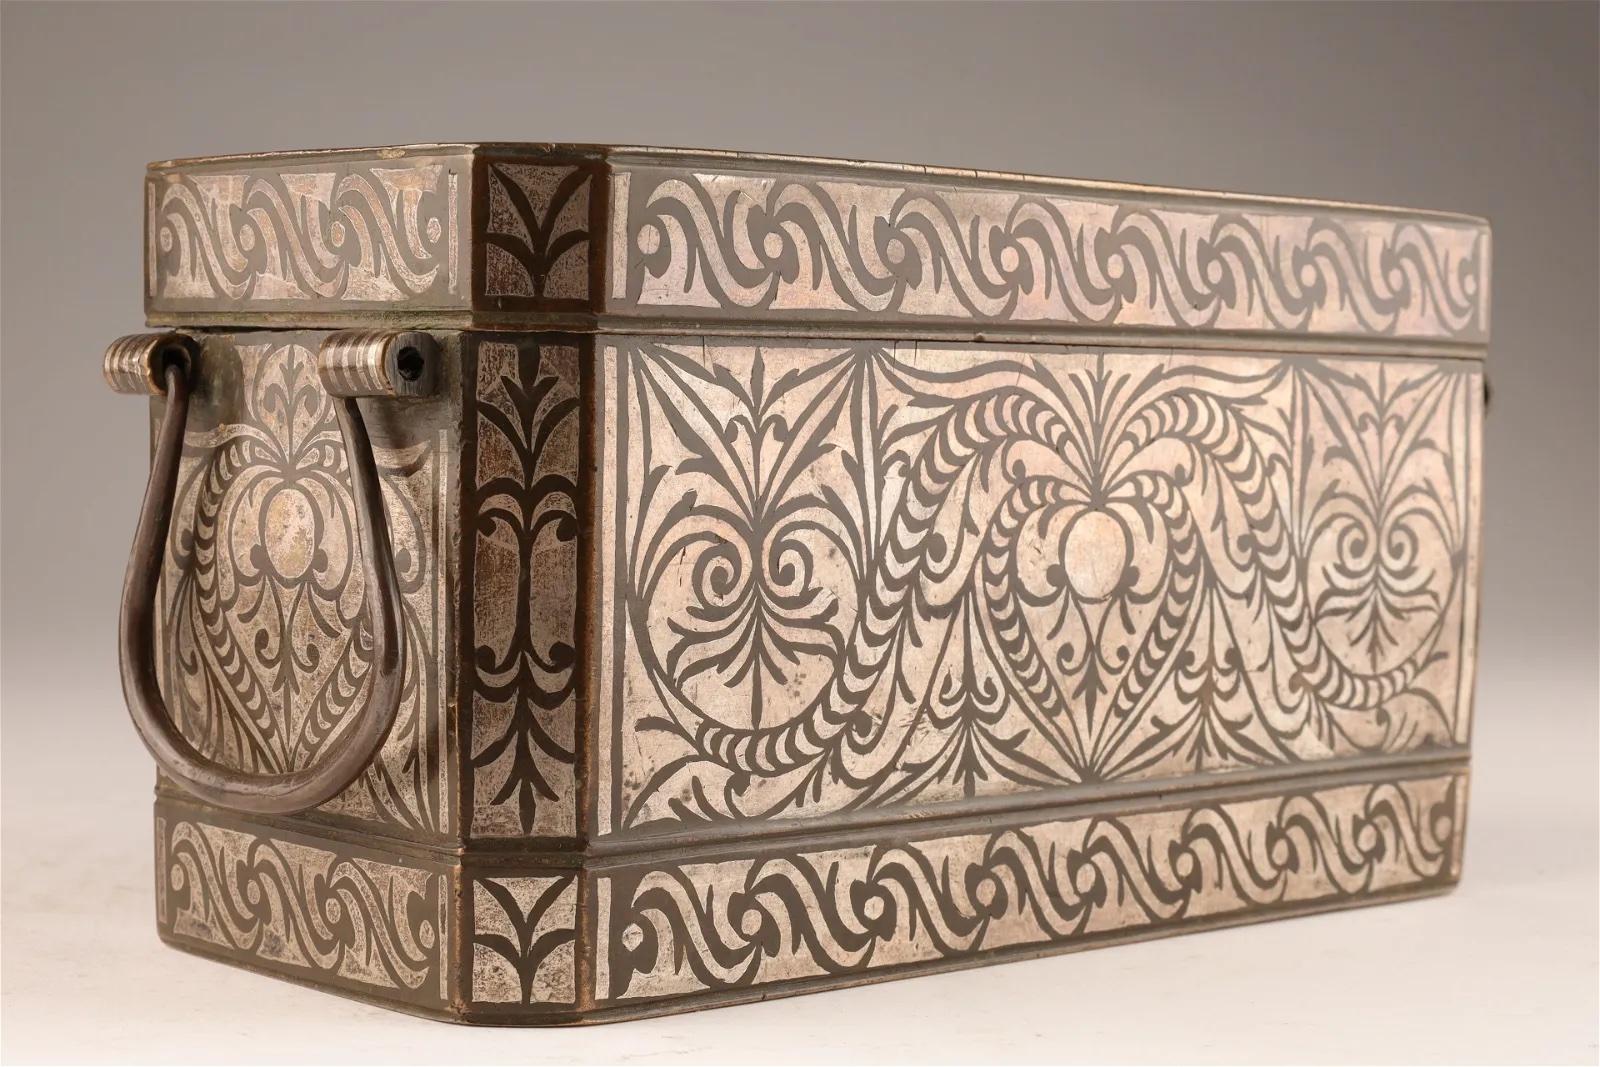 This is a fine example of an early 20th C rectangular bronze betal nut box with beautiful and elaborate silver inlay from Mindanao in the Philippines. The box has a handle on each side and has four compartments inside with silver inlaid lids to hold